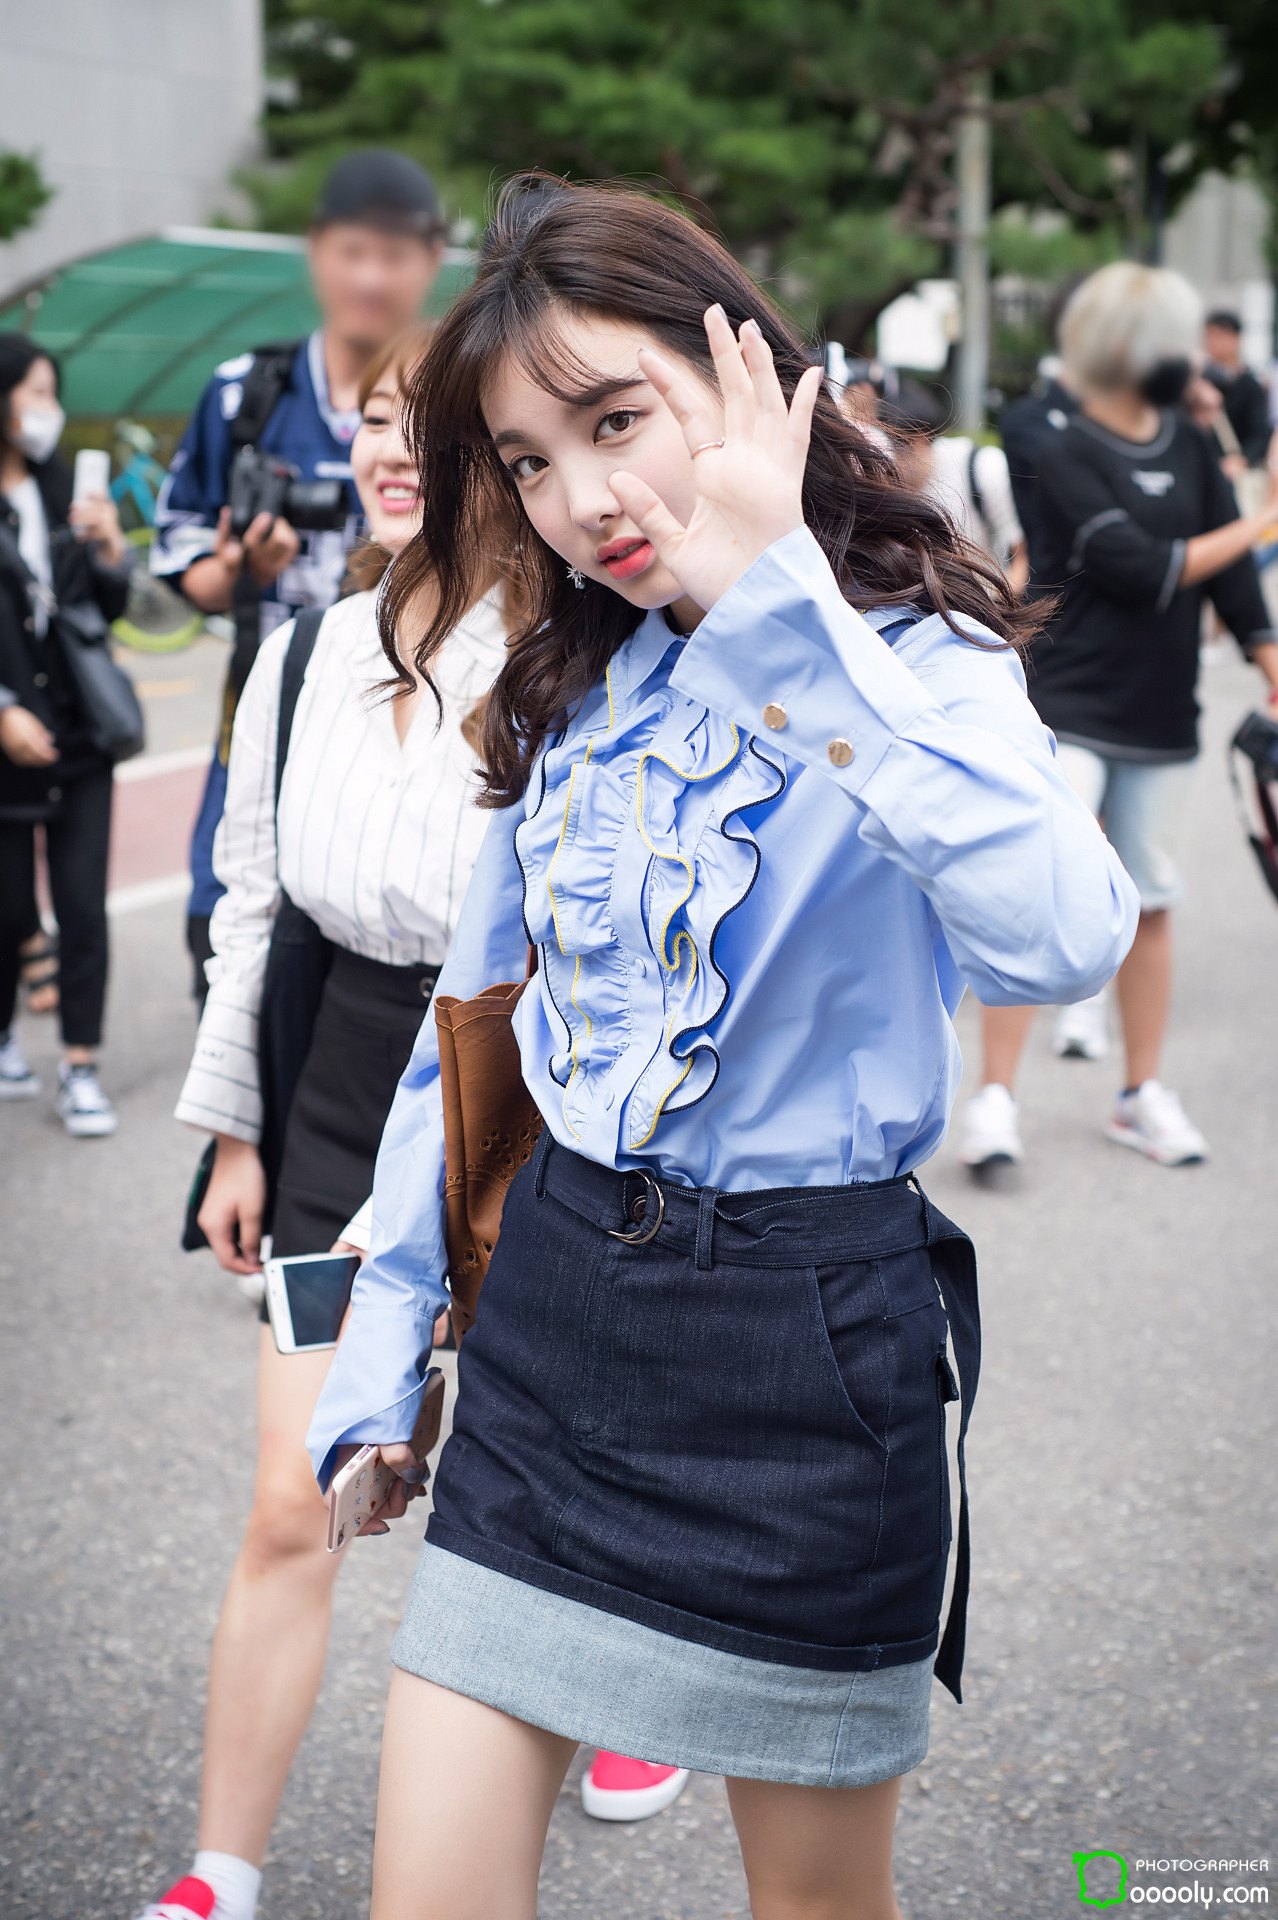 Nayeon's Perfect Outfits Have Fans Calling Her K-Pop's Next Fashion Queen - Koreaboo